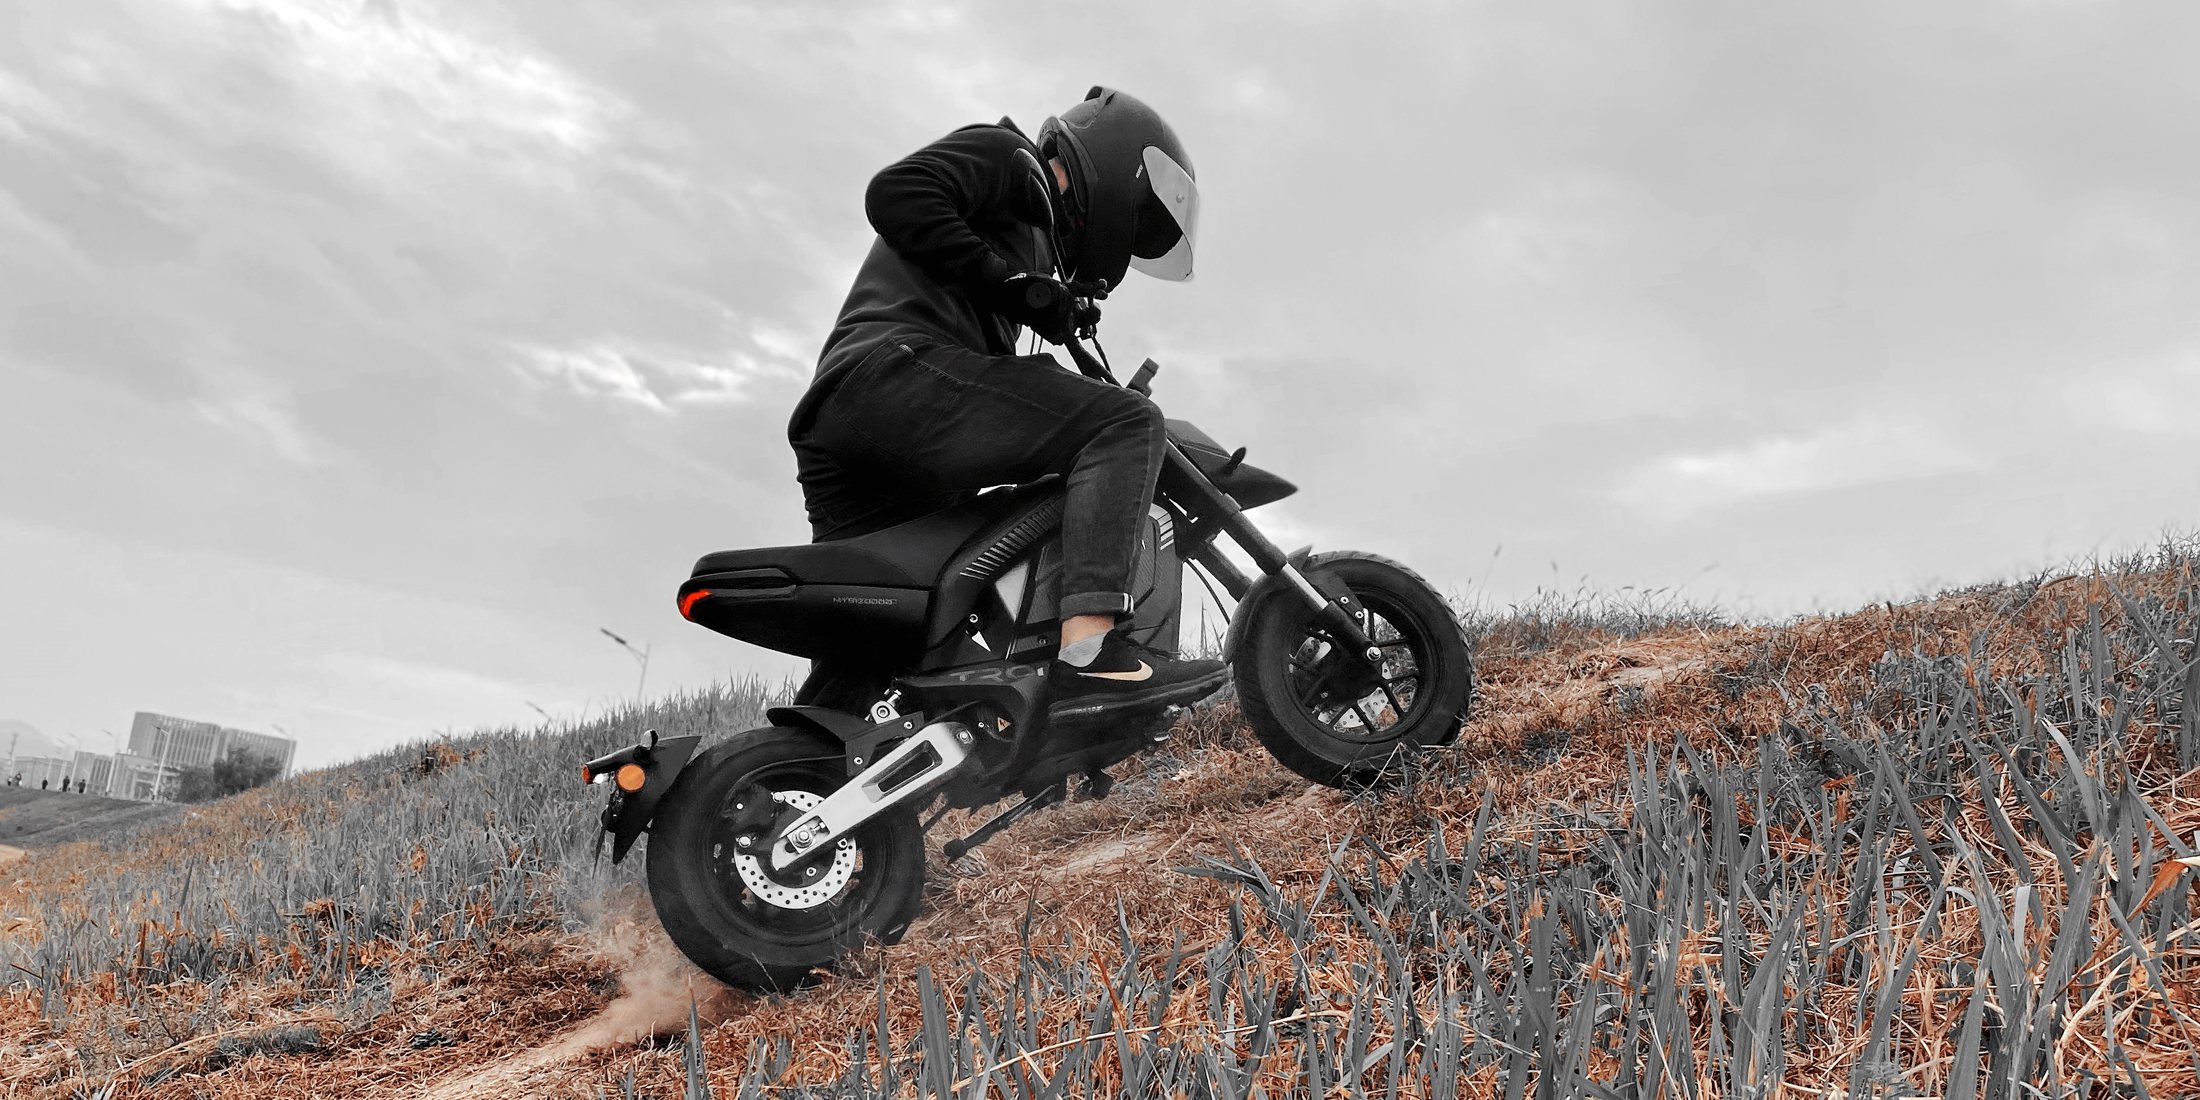 boom electric motorcycle